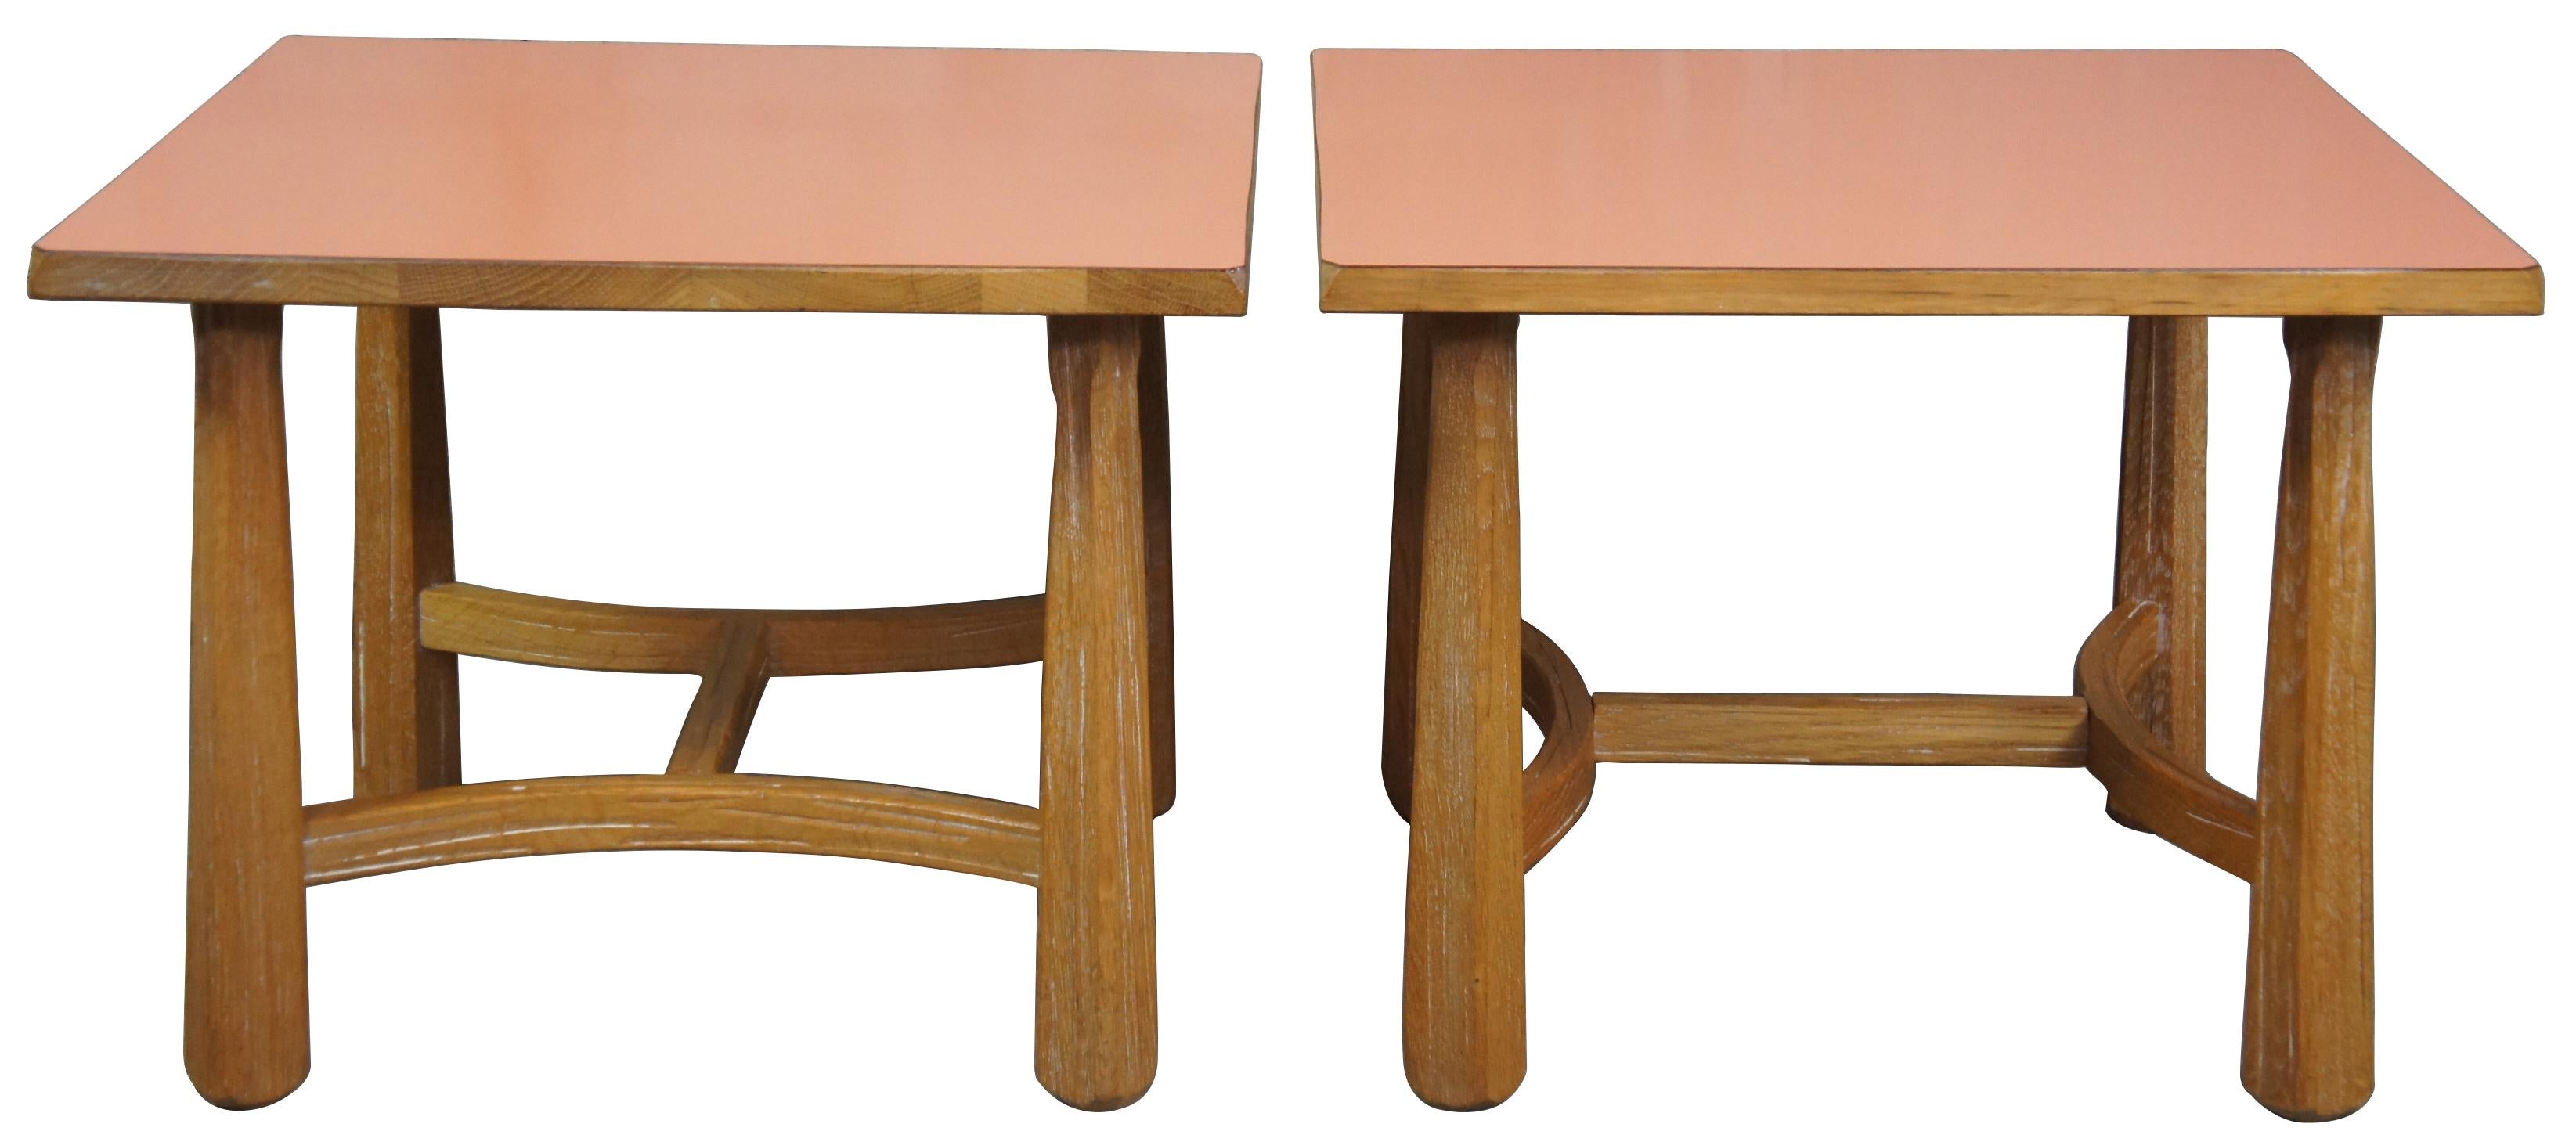 Pair of 1960s ranch oak side tables by A. Brandt out of Ft. Worth Texas. Square shaped with cut corners and salmon colored top. 
    